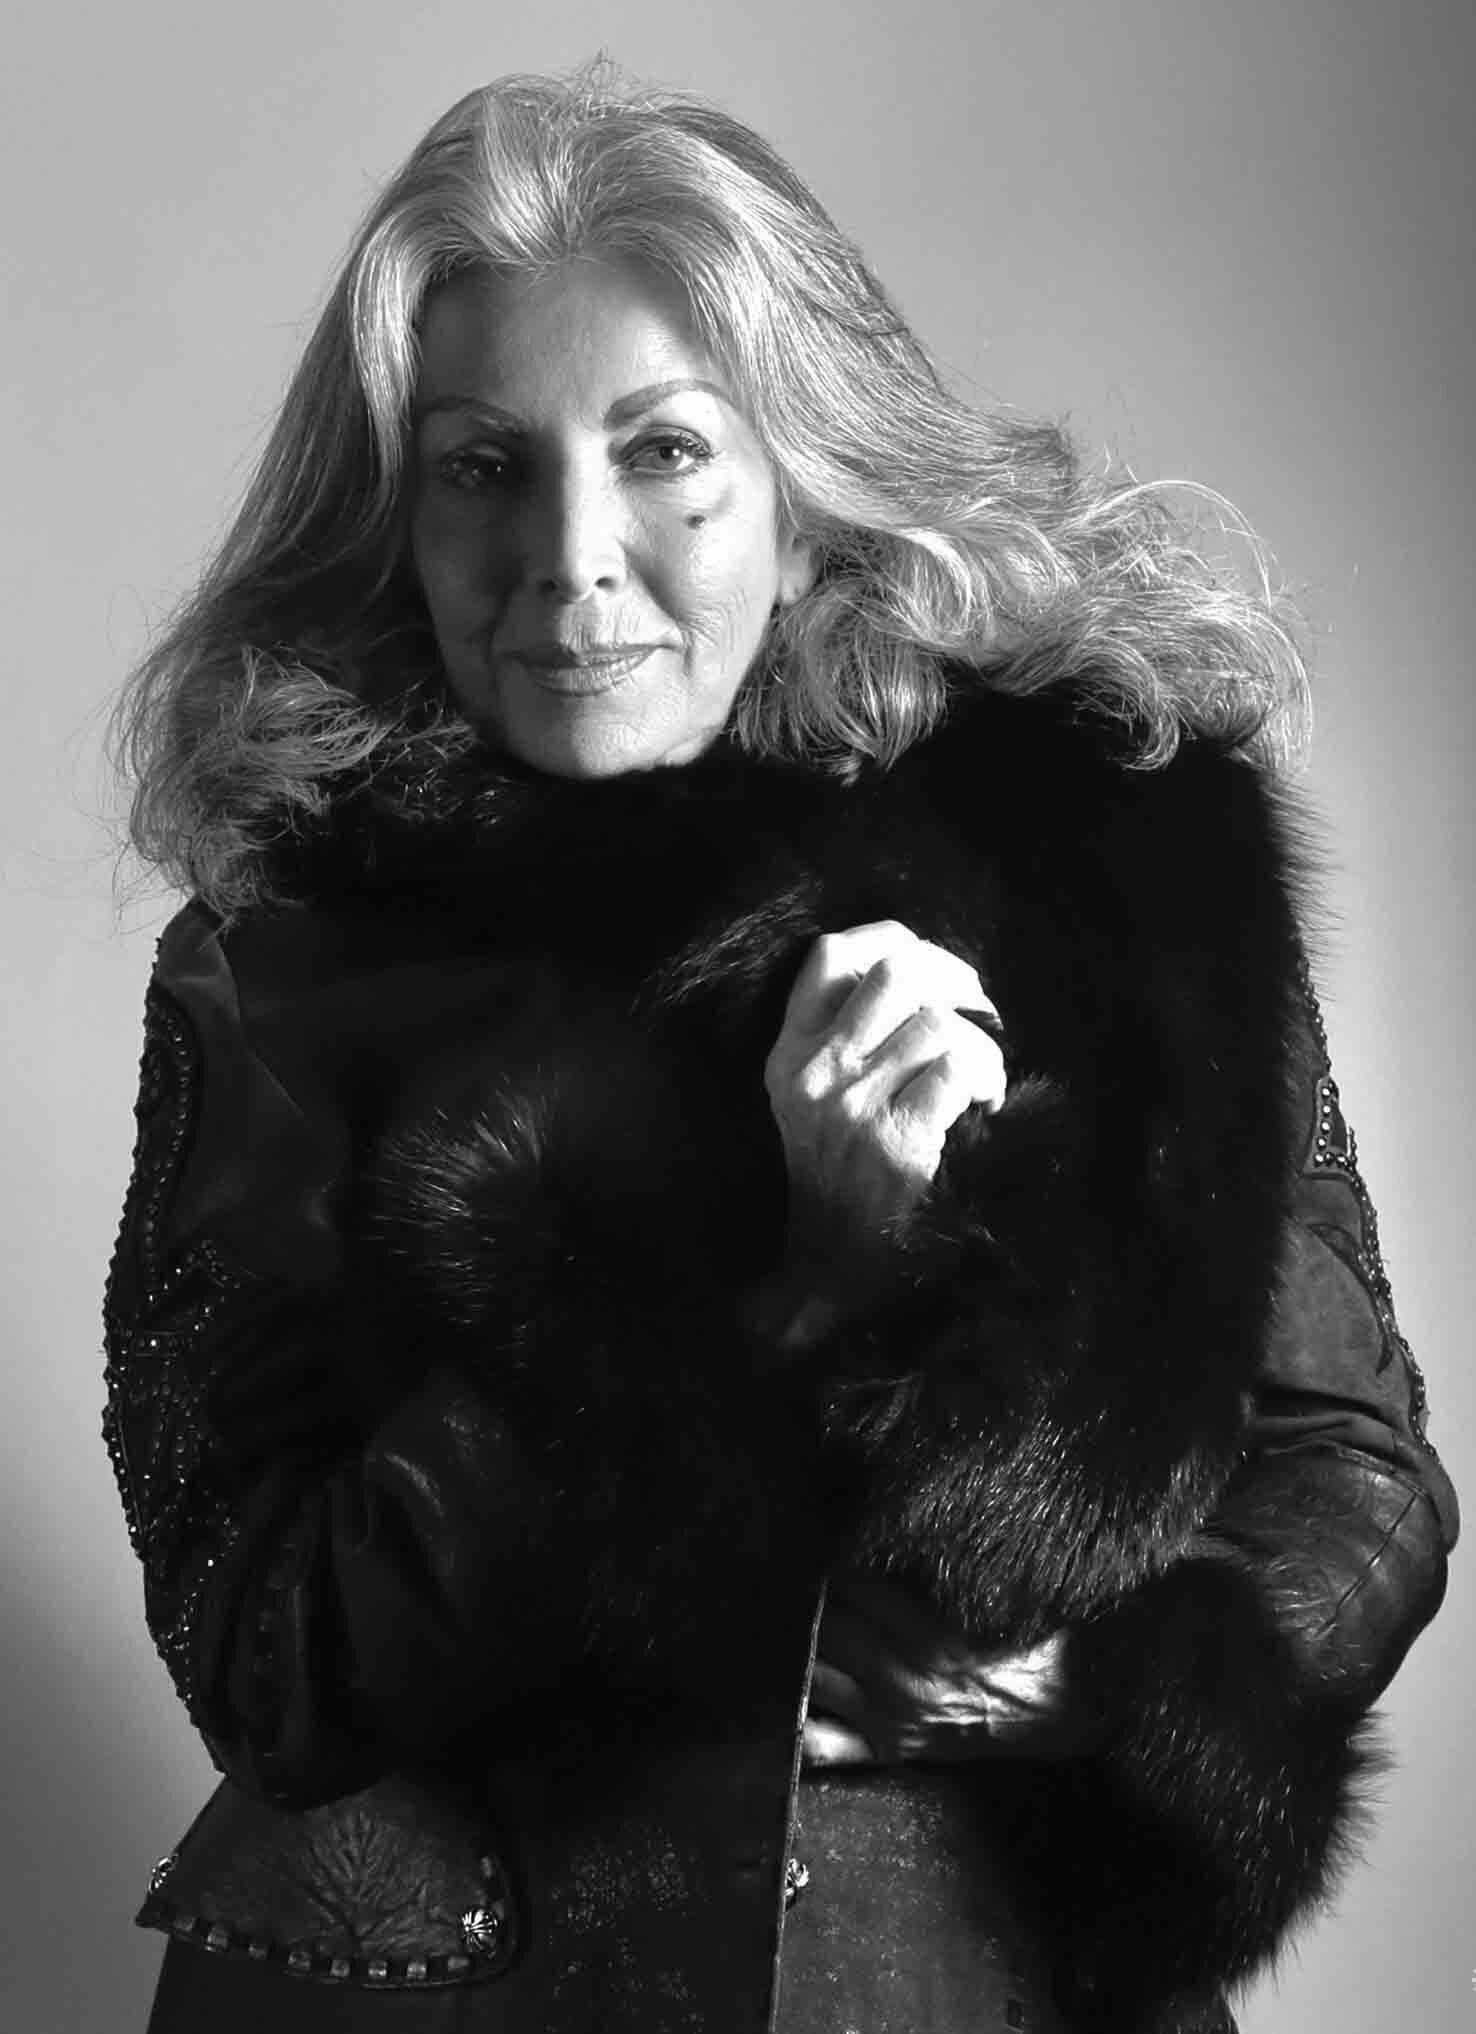 Black and white photo of a woman wearing a fur coat